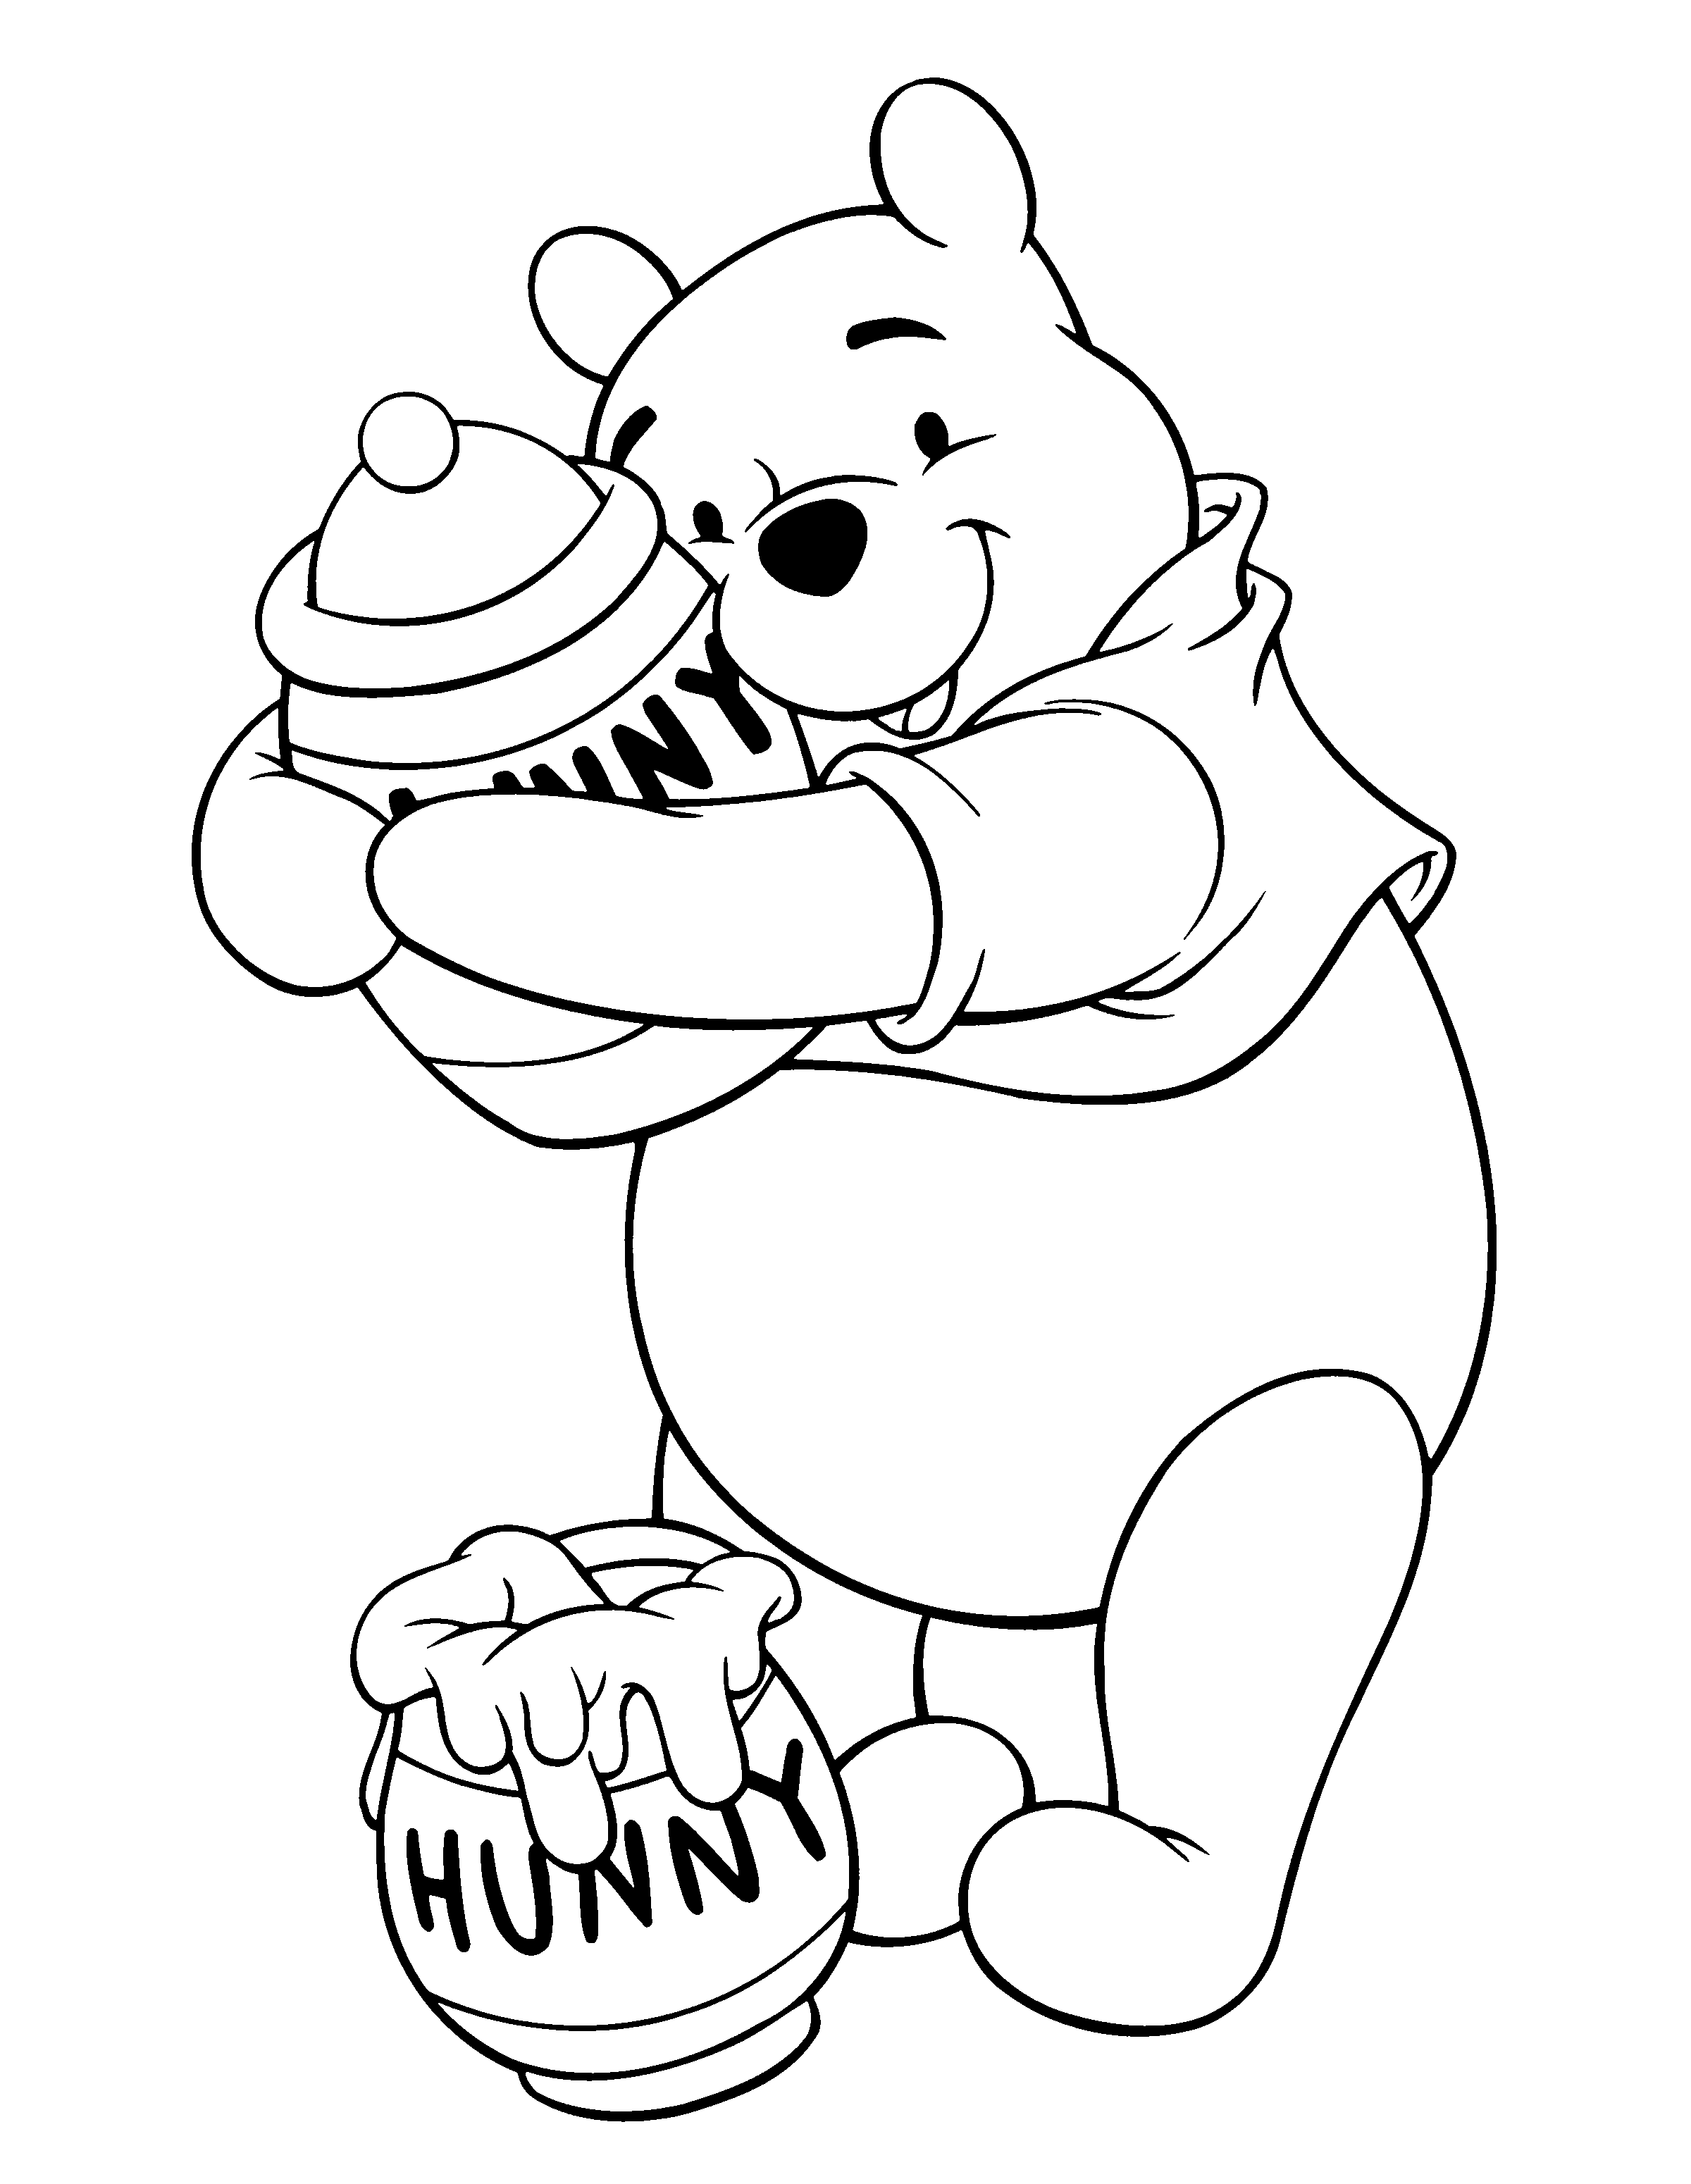 Coloring Page - Winnie the pooh coloring pages 79